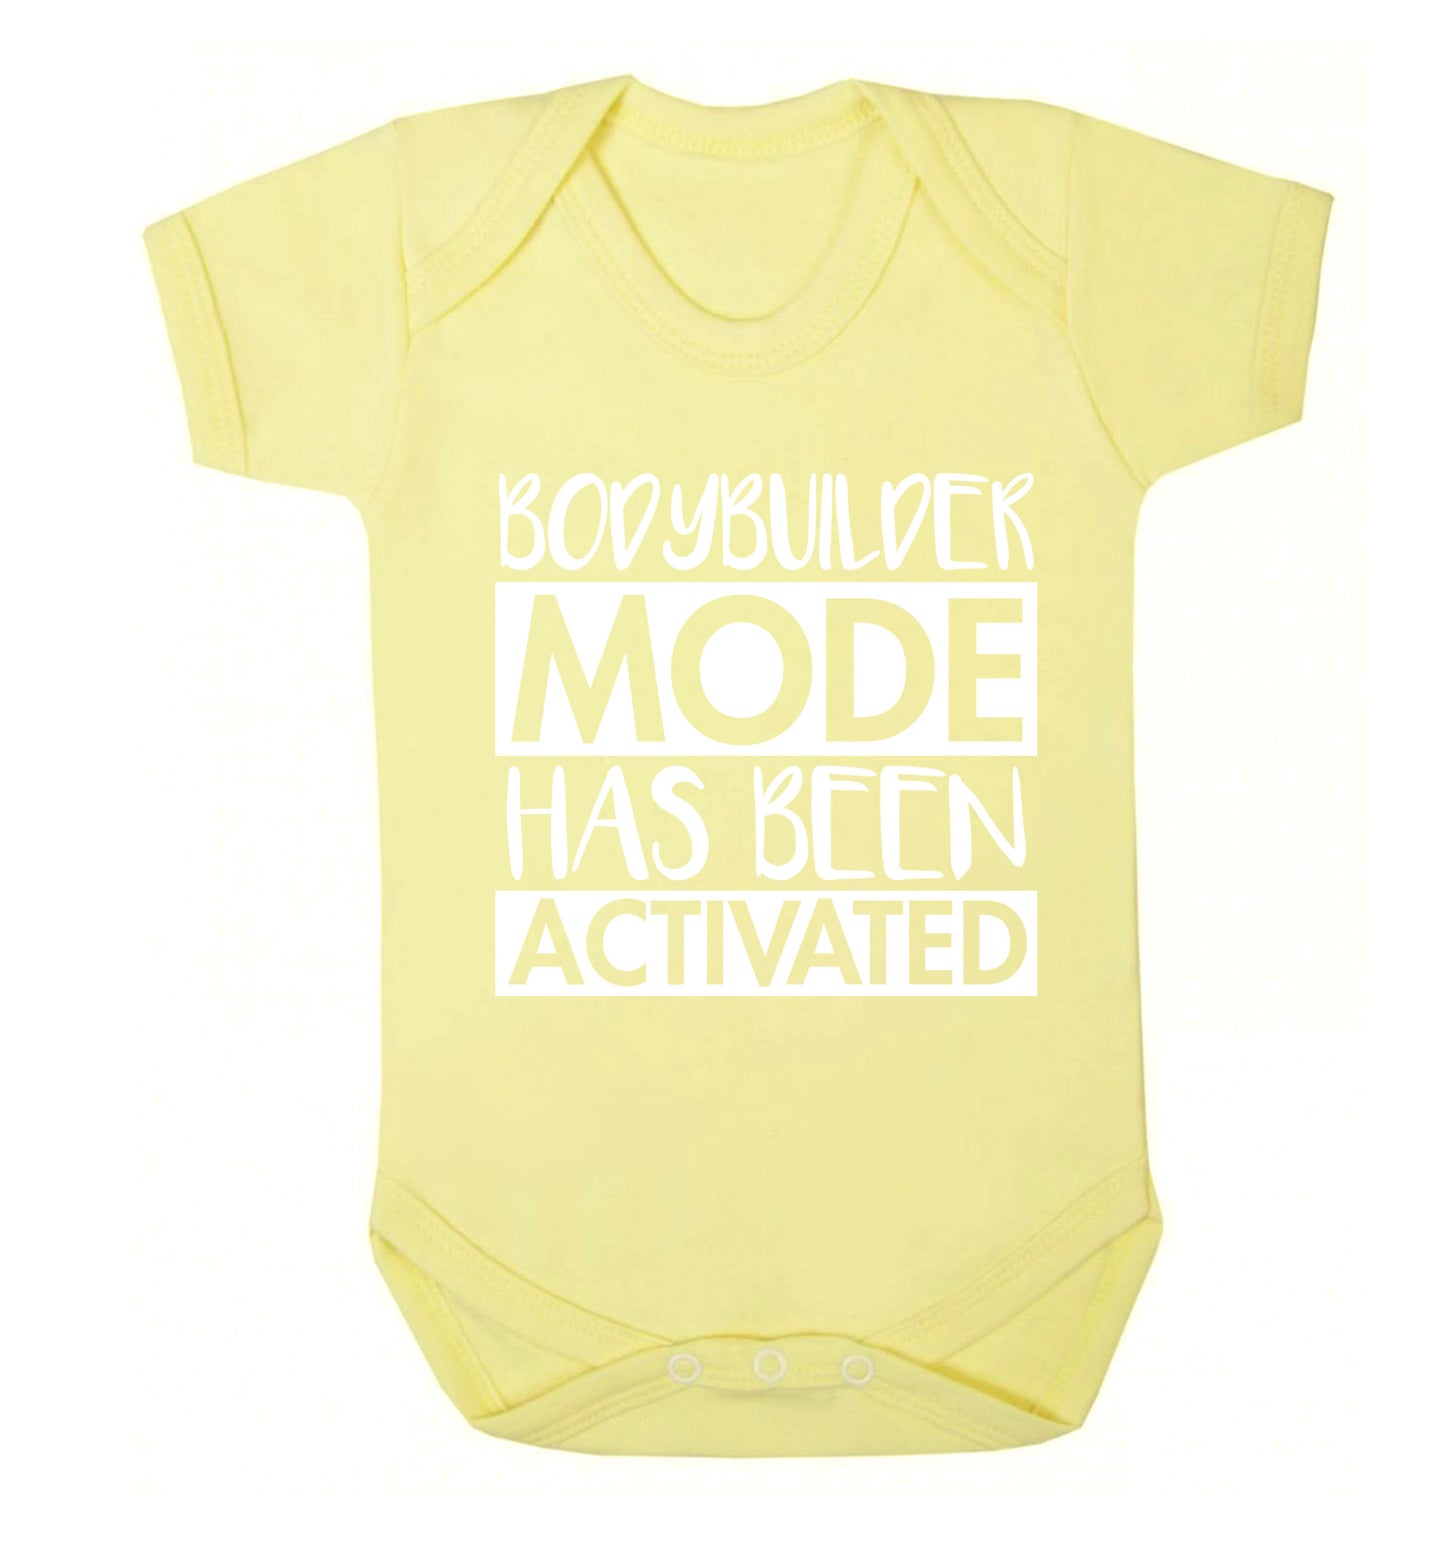 Bodybuilder mode activated Baby Vest pale yellow 18-24 months